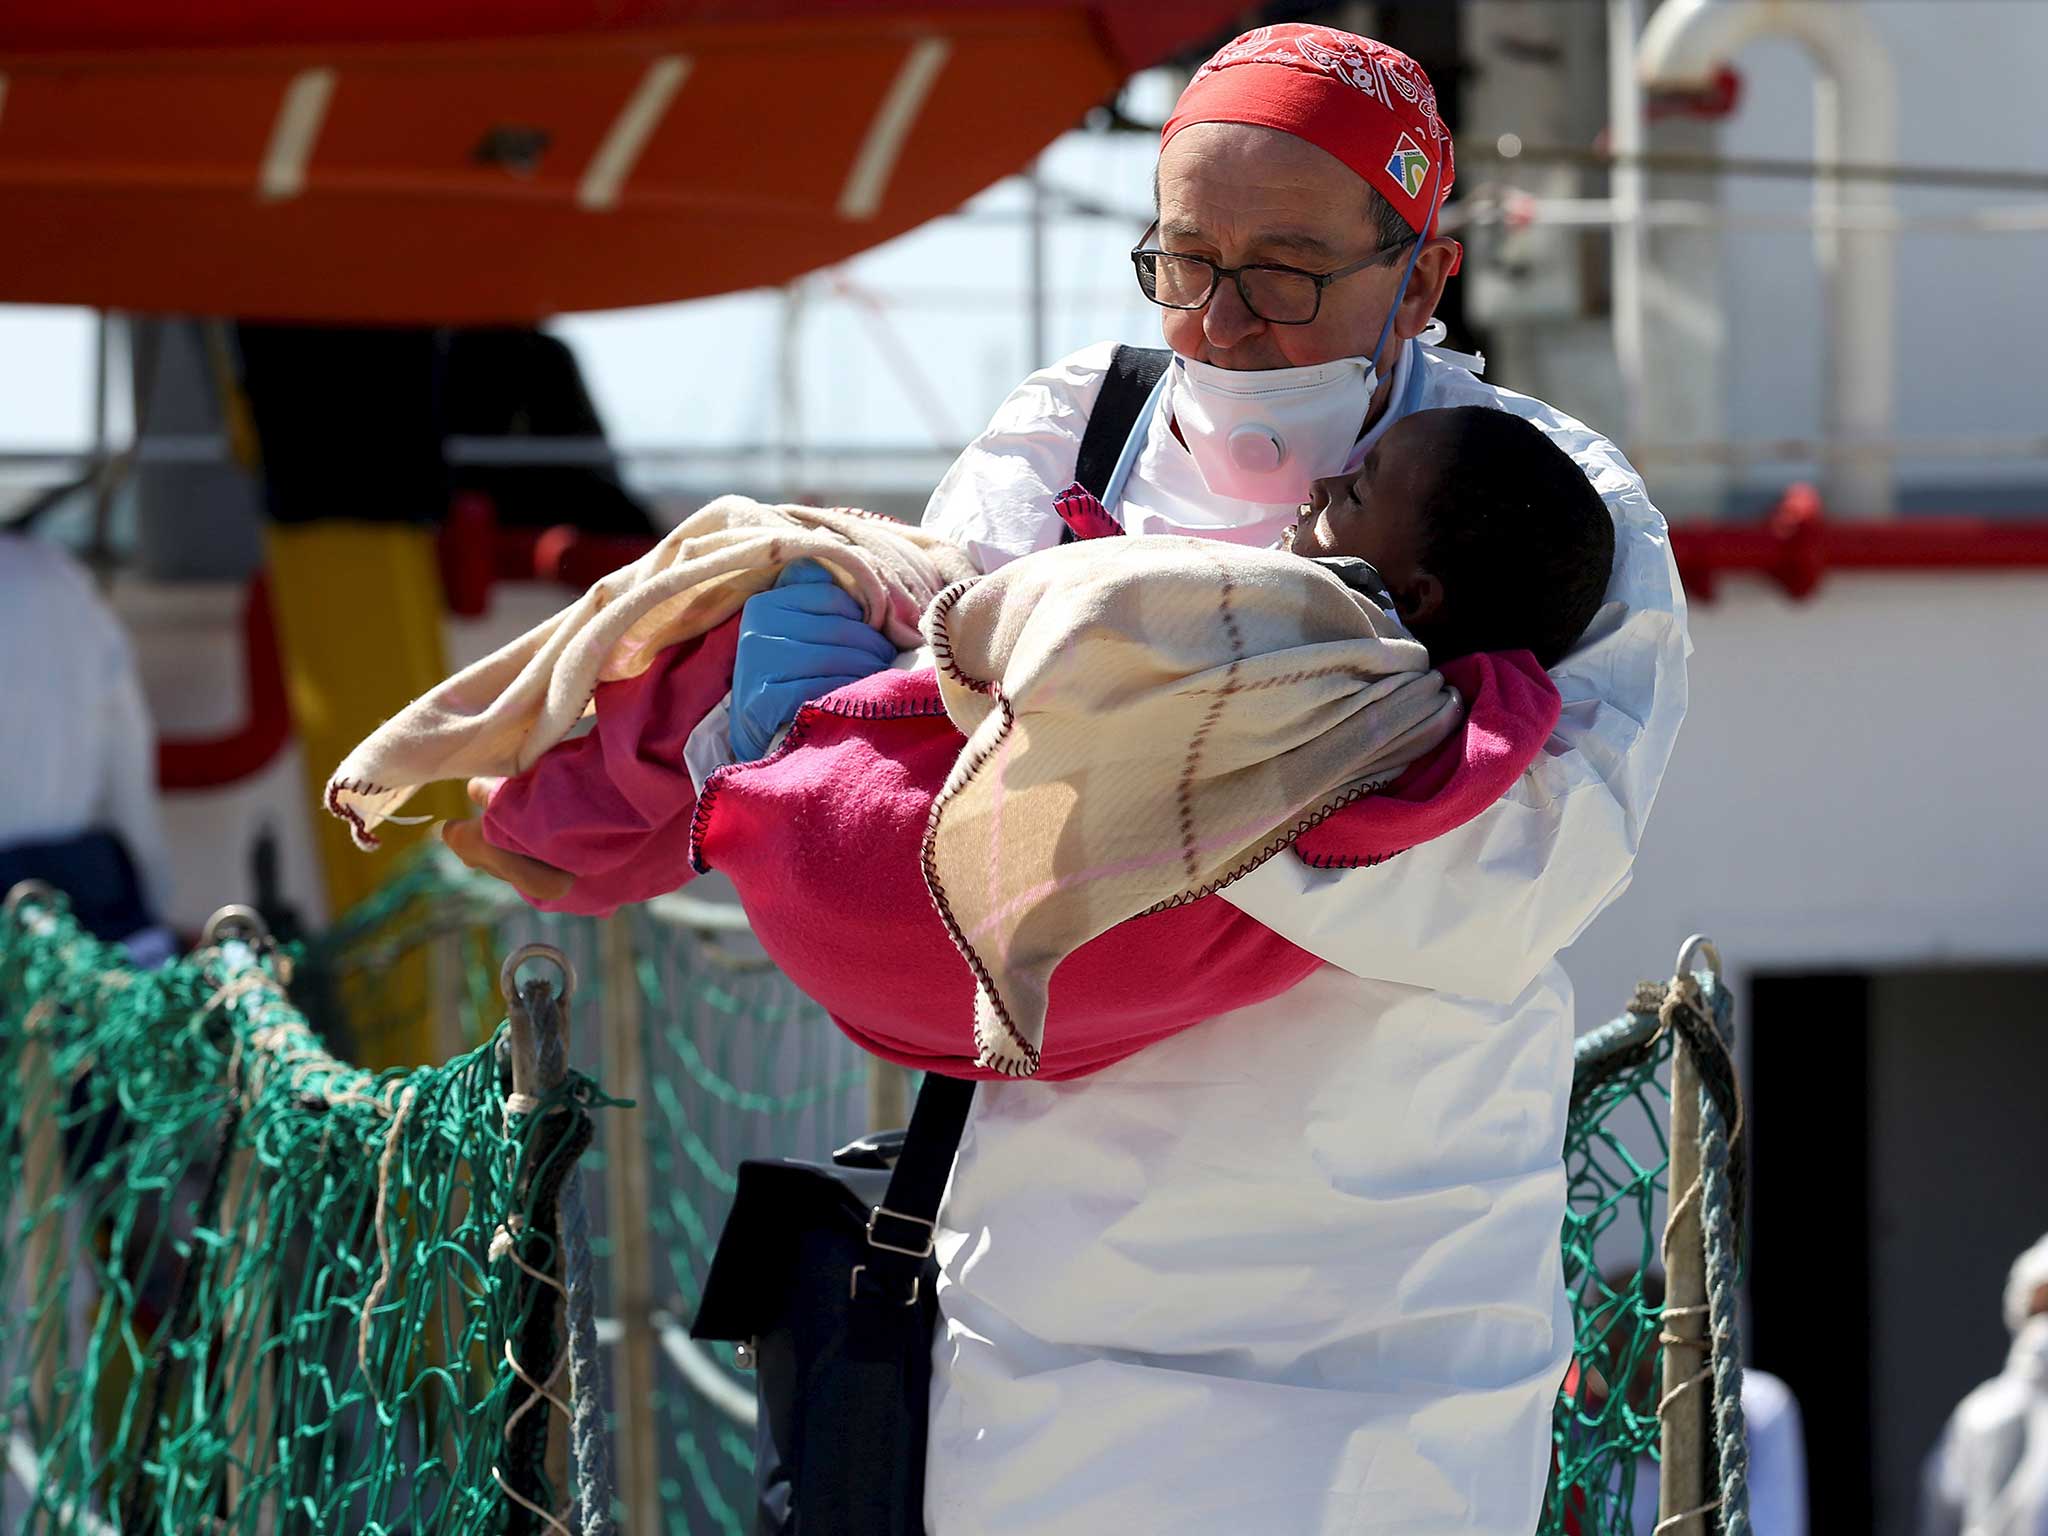 A doctor carries a child as refugees disembark from the Medecins Sans Frontieres (MSF) vessel at Pozzallo's harbour in Sicily, Italy